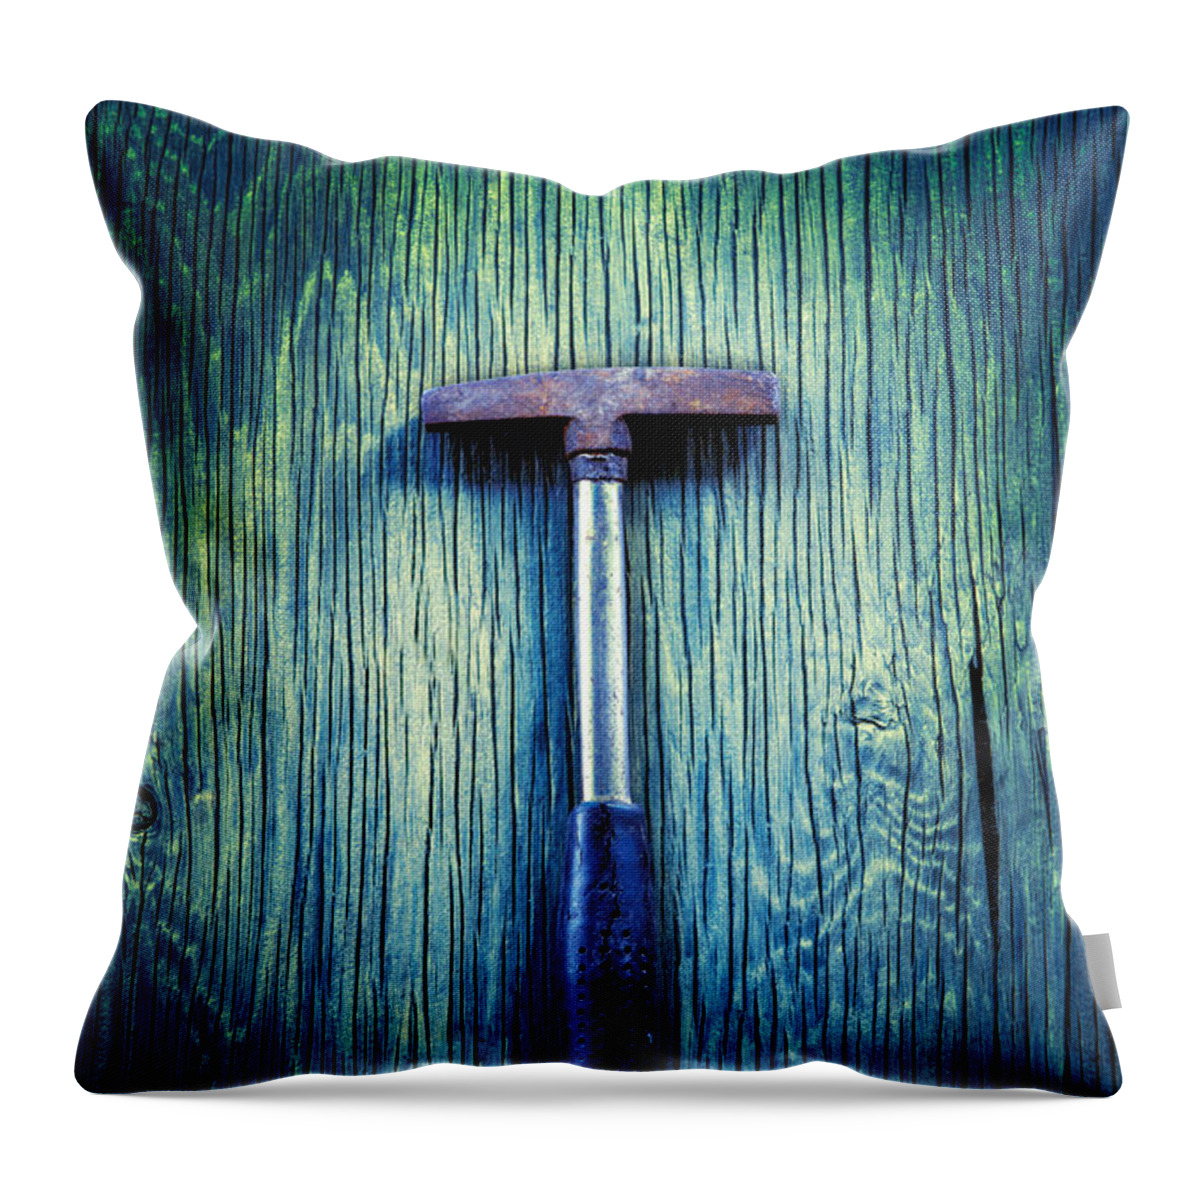 Industrial Throw Pillow featuring the photograph Tools On Wood 39 by YoPedro